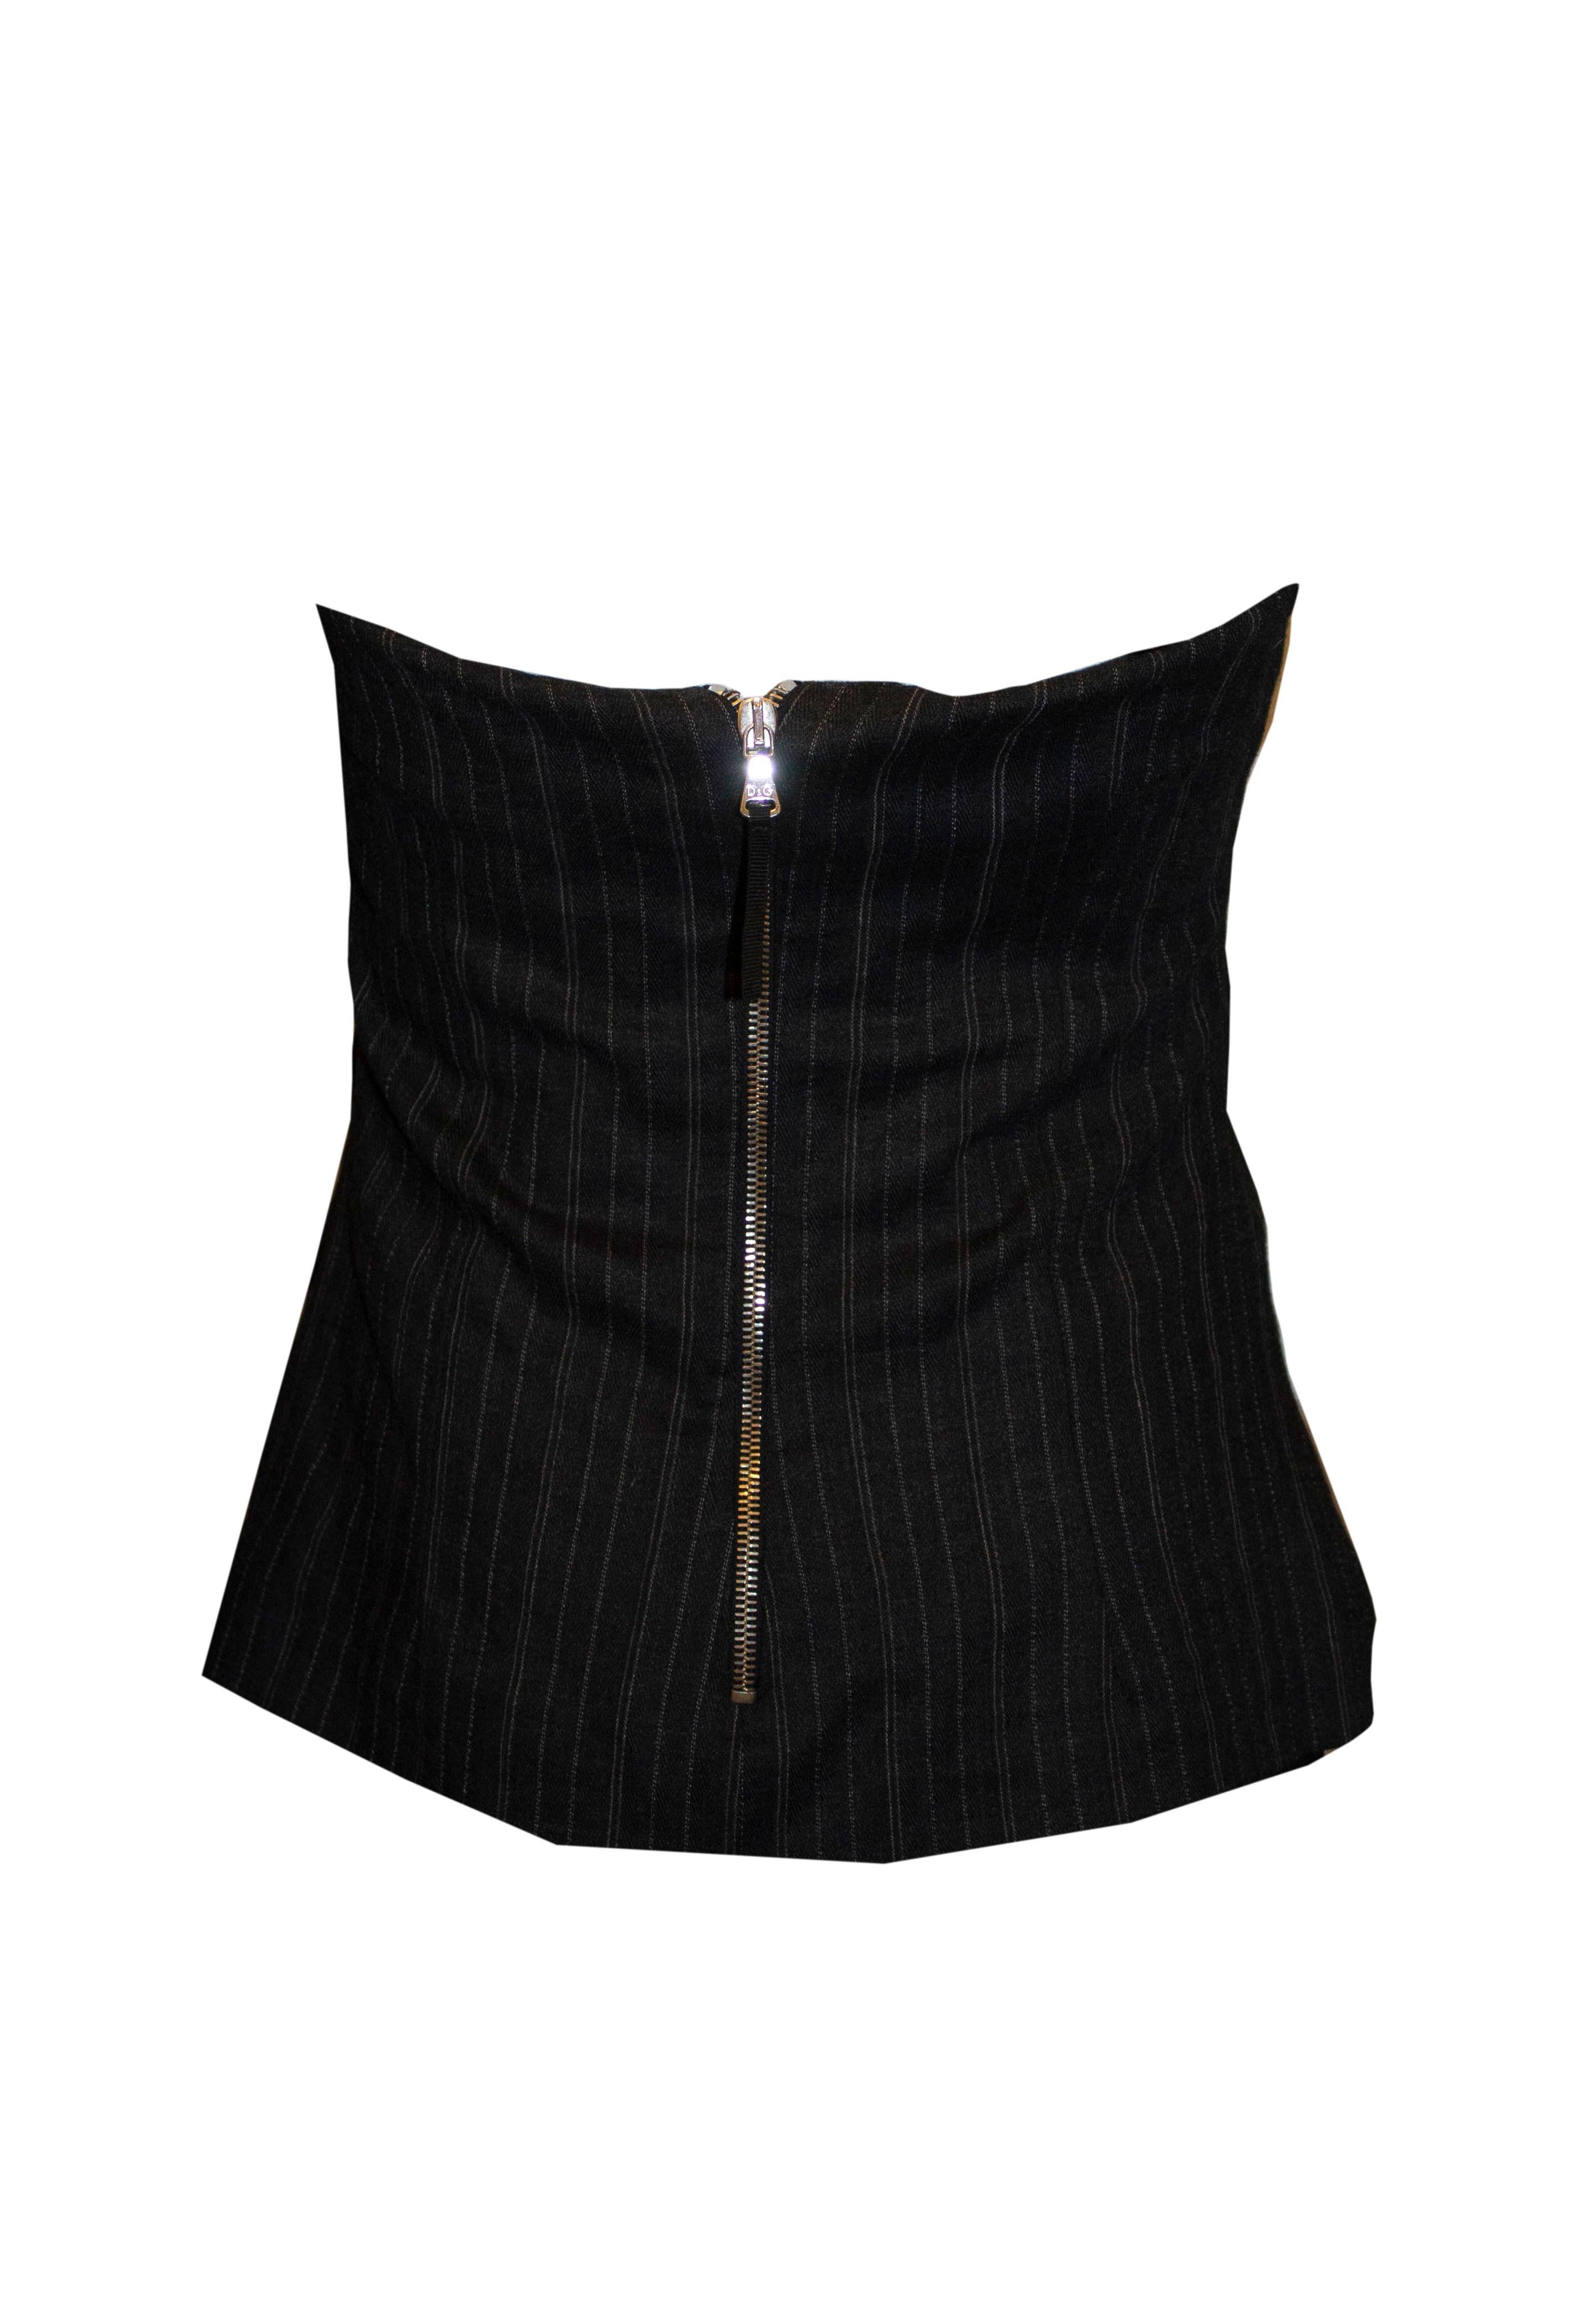 Dolce and Gabbana Pin Stripe Corset In Good Condition For Sale In London, GB